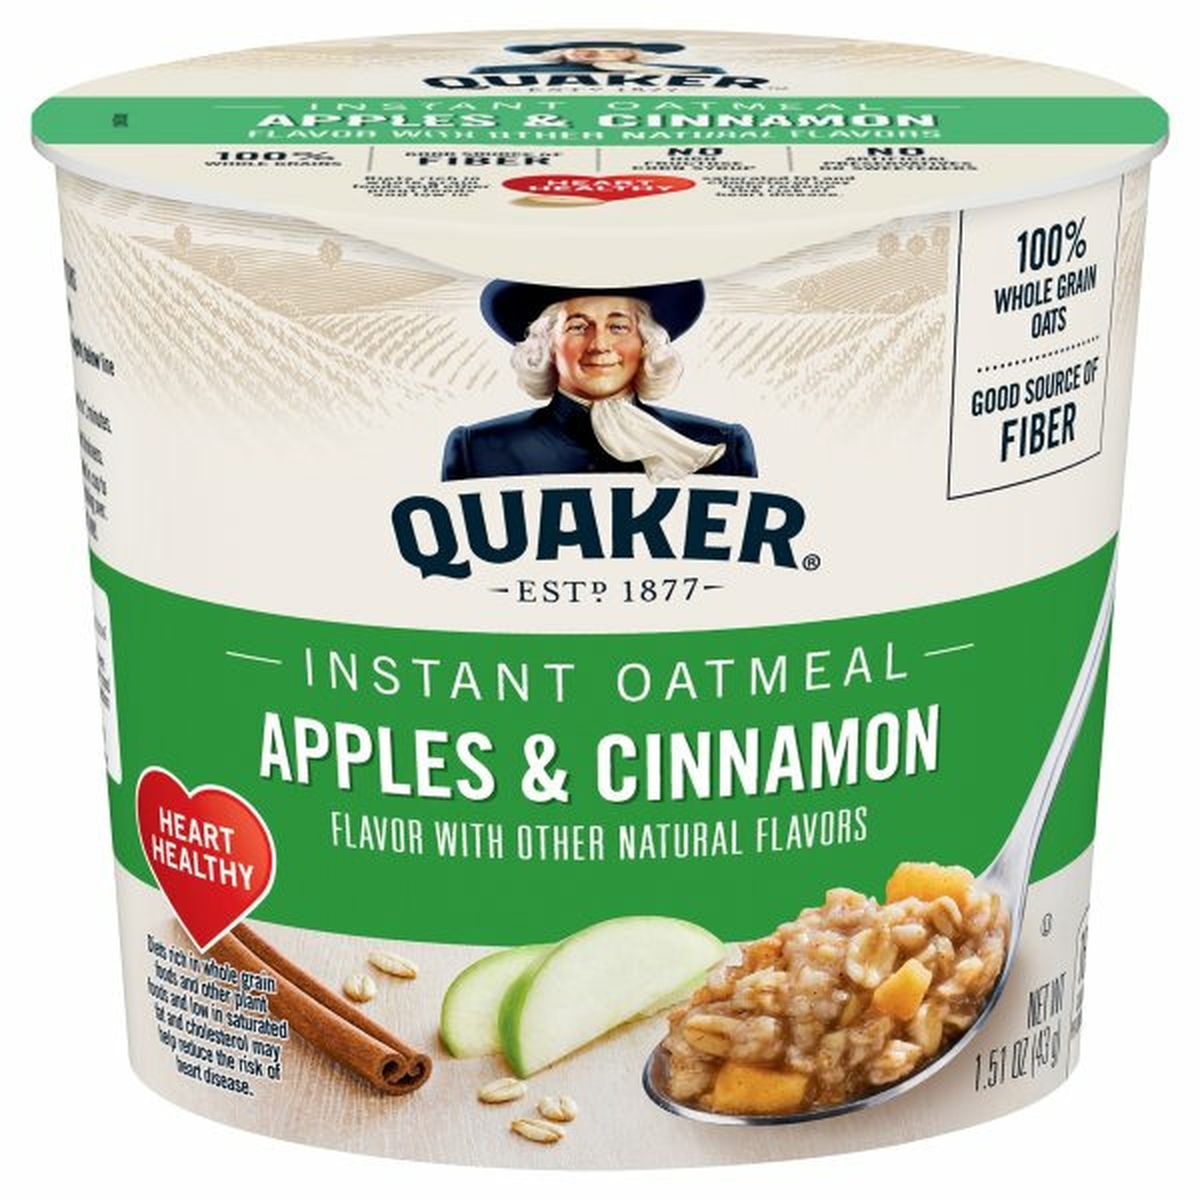 Calories in Quaker Instant Oatmeal Instant Oats Hot Cereal, Apple & Cinnamon With Other Natural Flavors